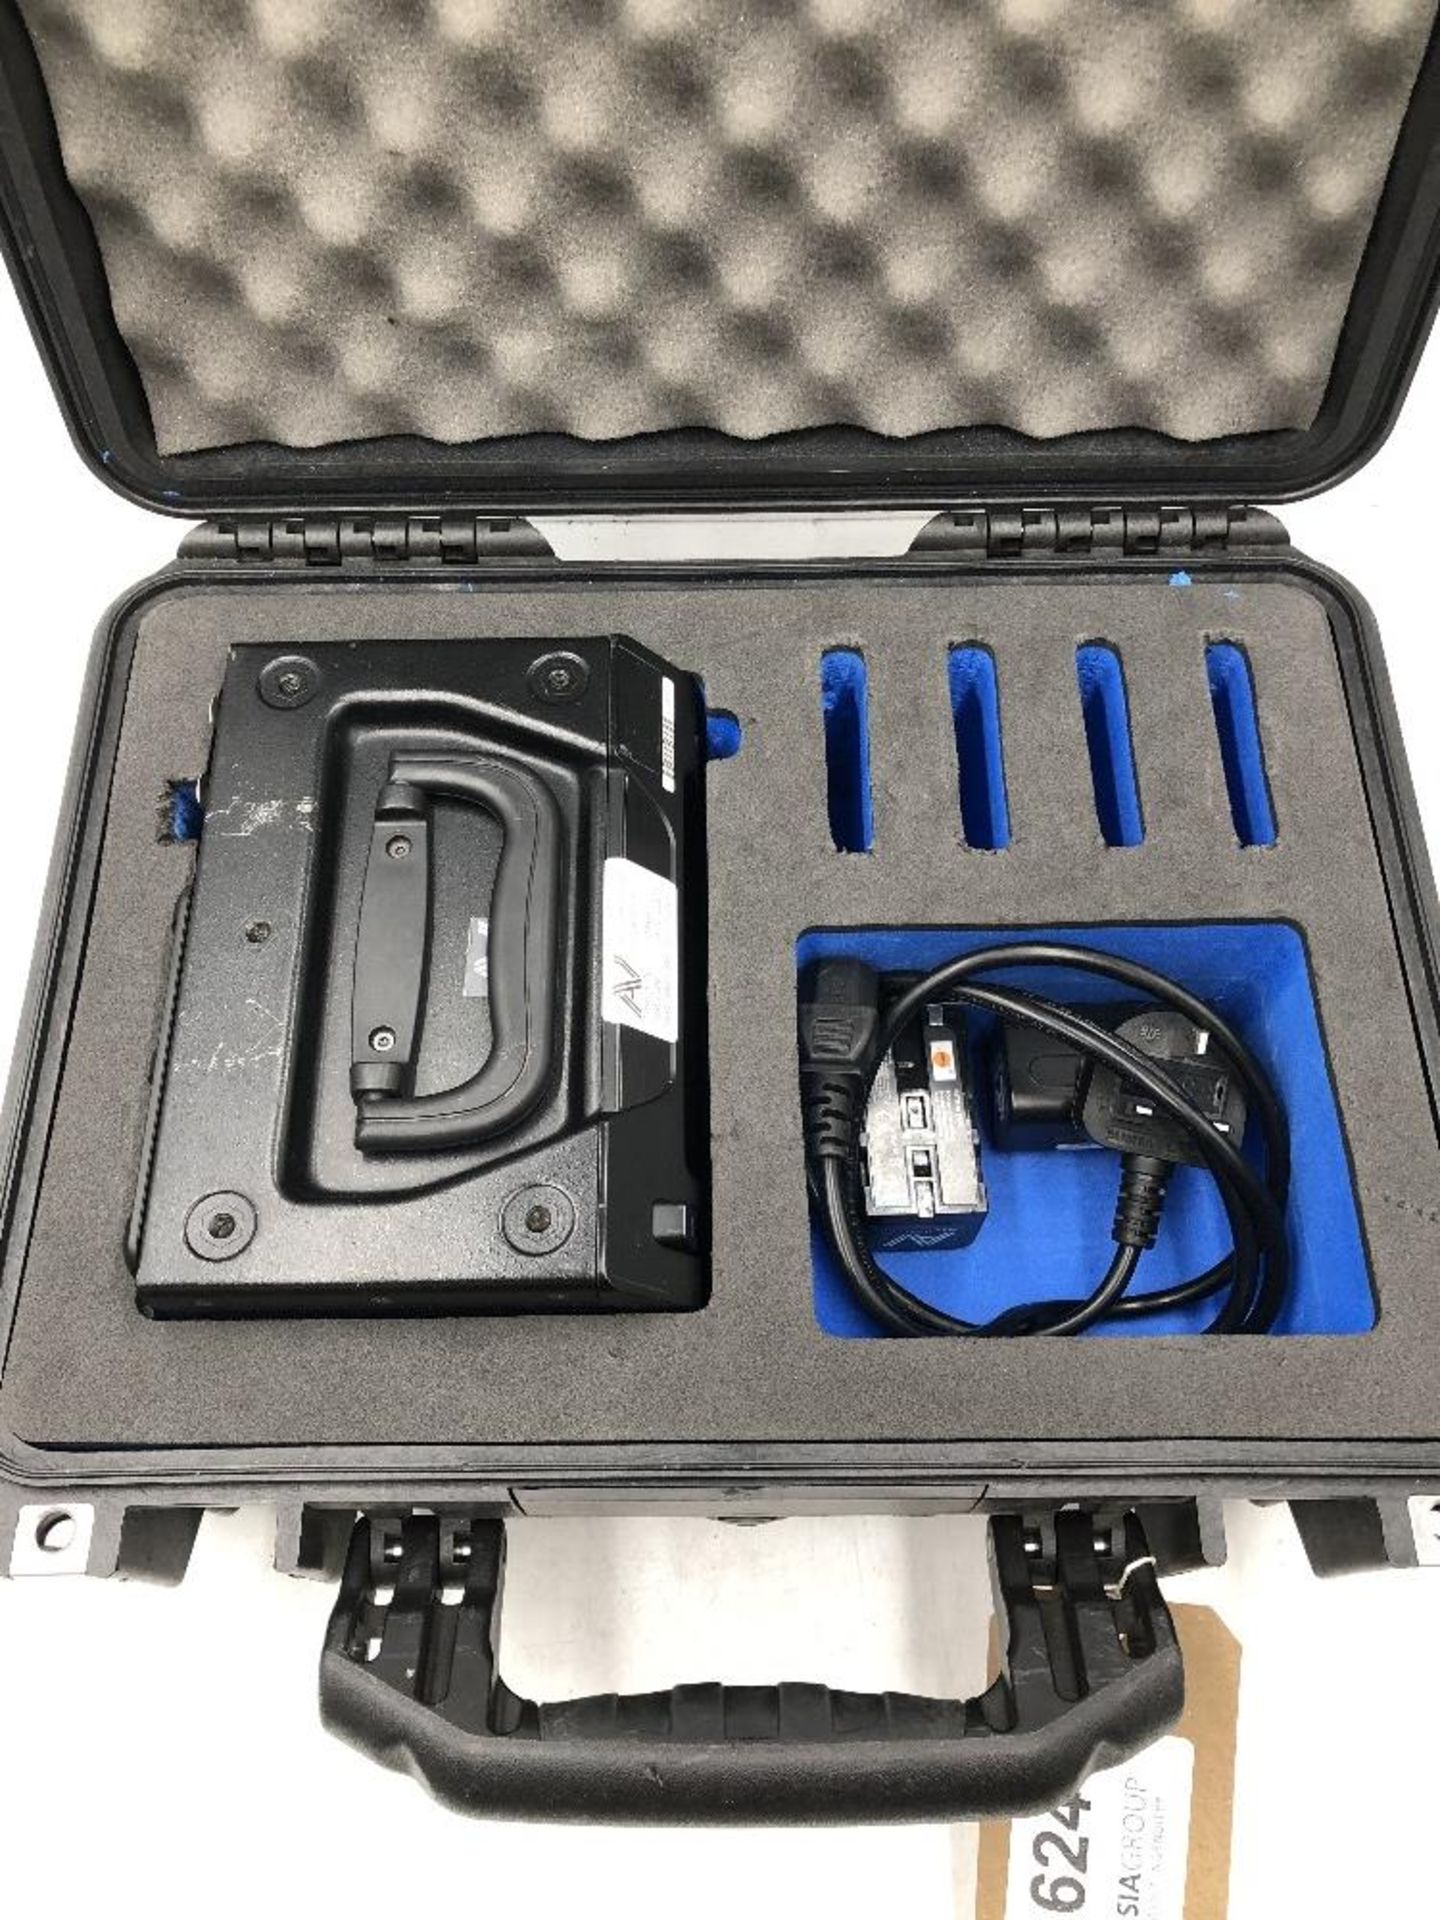 Atomos Ronin SDI Recorder/Player with Protective Case and PSU - Image 2 of 6